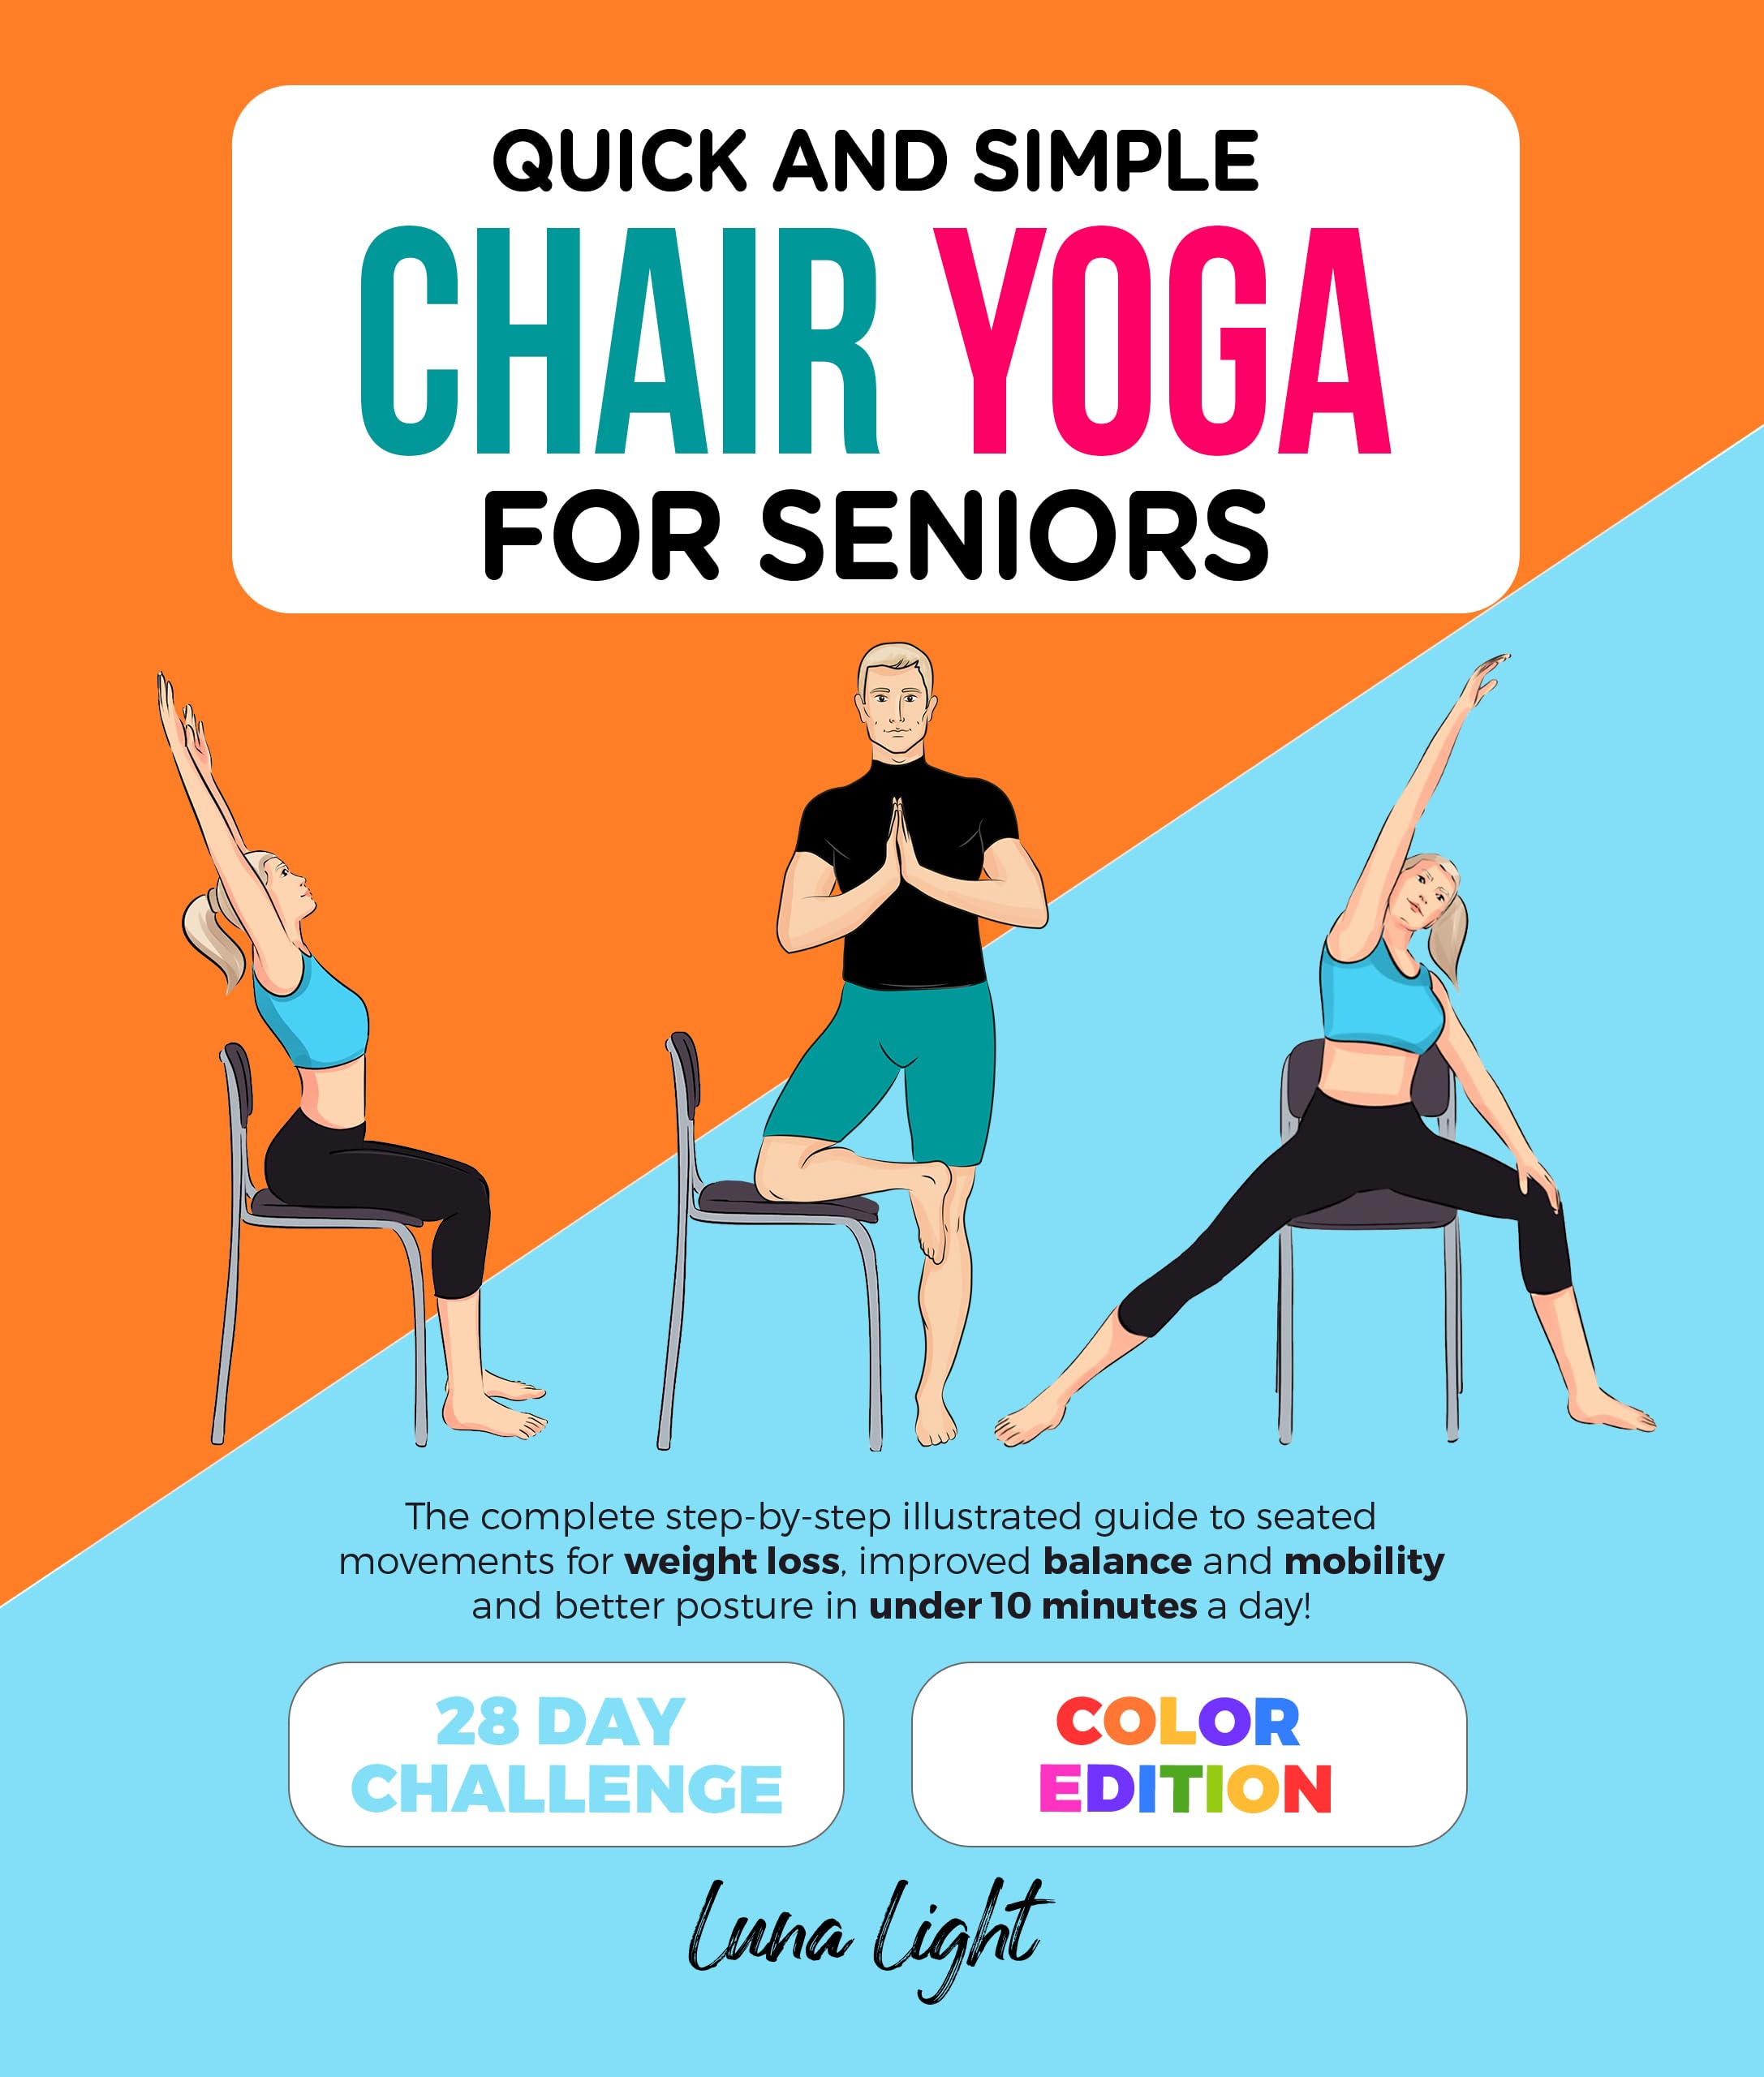 Quick And Simple Chair Yoga For Seniors: The Complete Step-by-Step Illustrated Guide to Seated Movements for Weight Loss, Improved Balance and Mobility ... in Under 10 Minutes a Day (Fun & Fit)